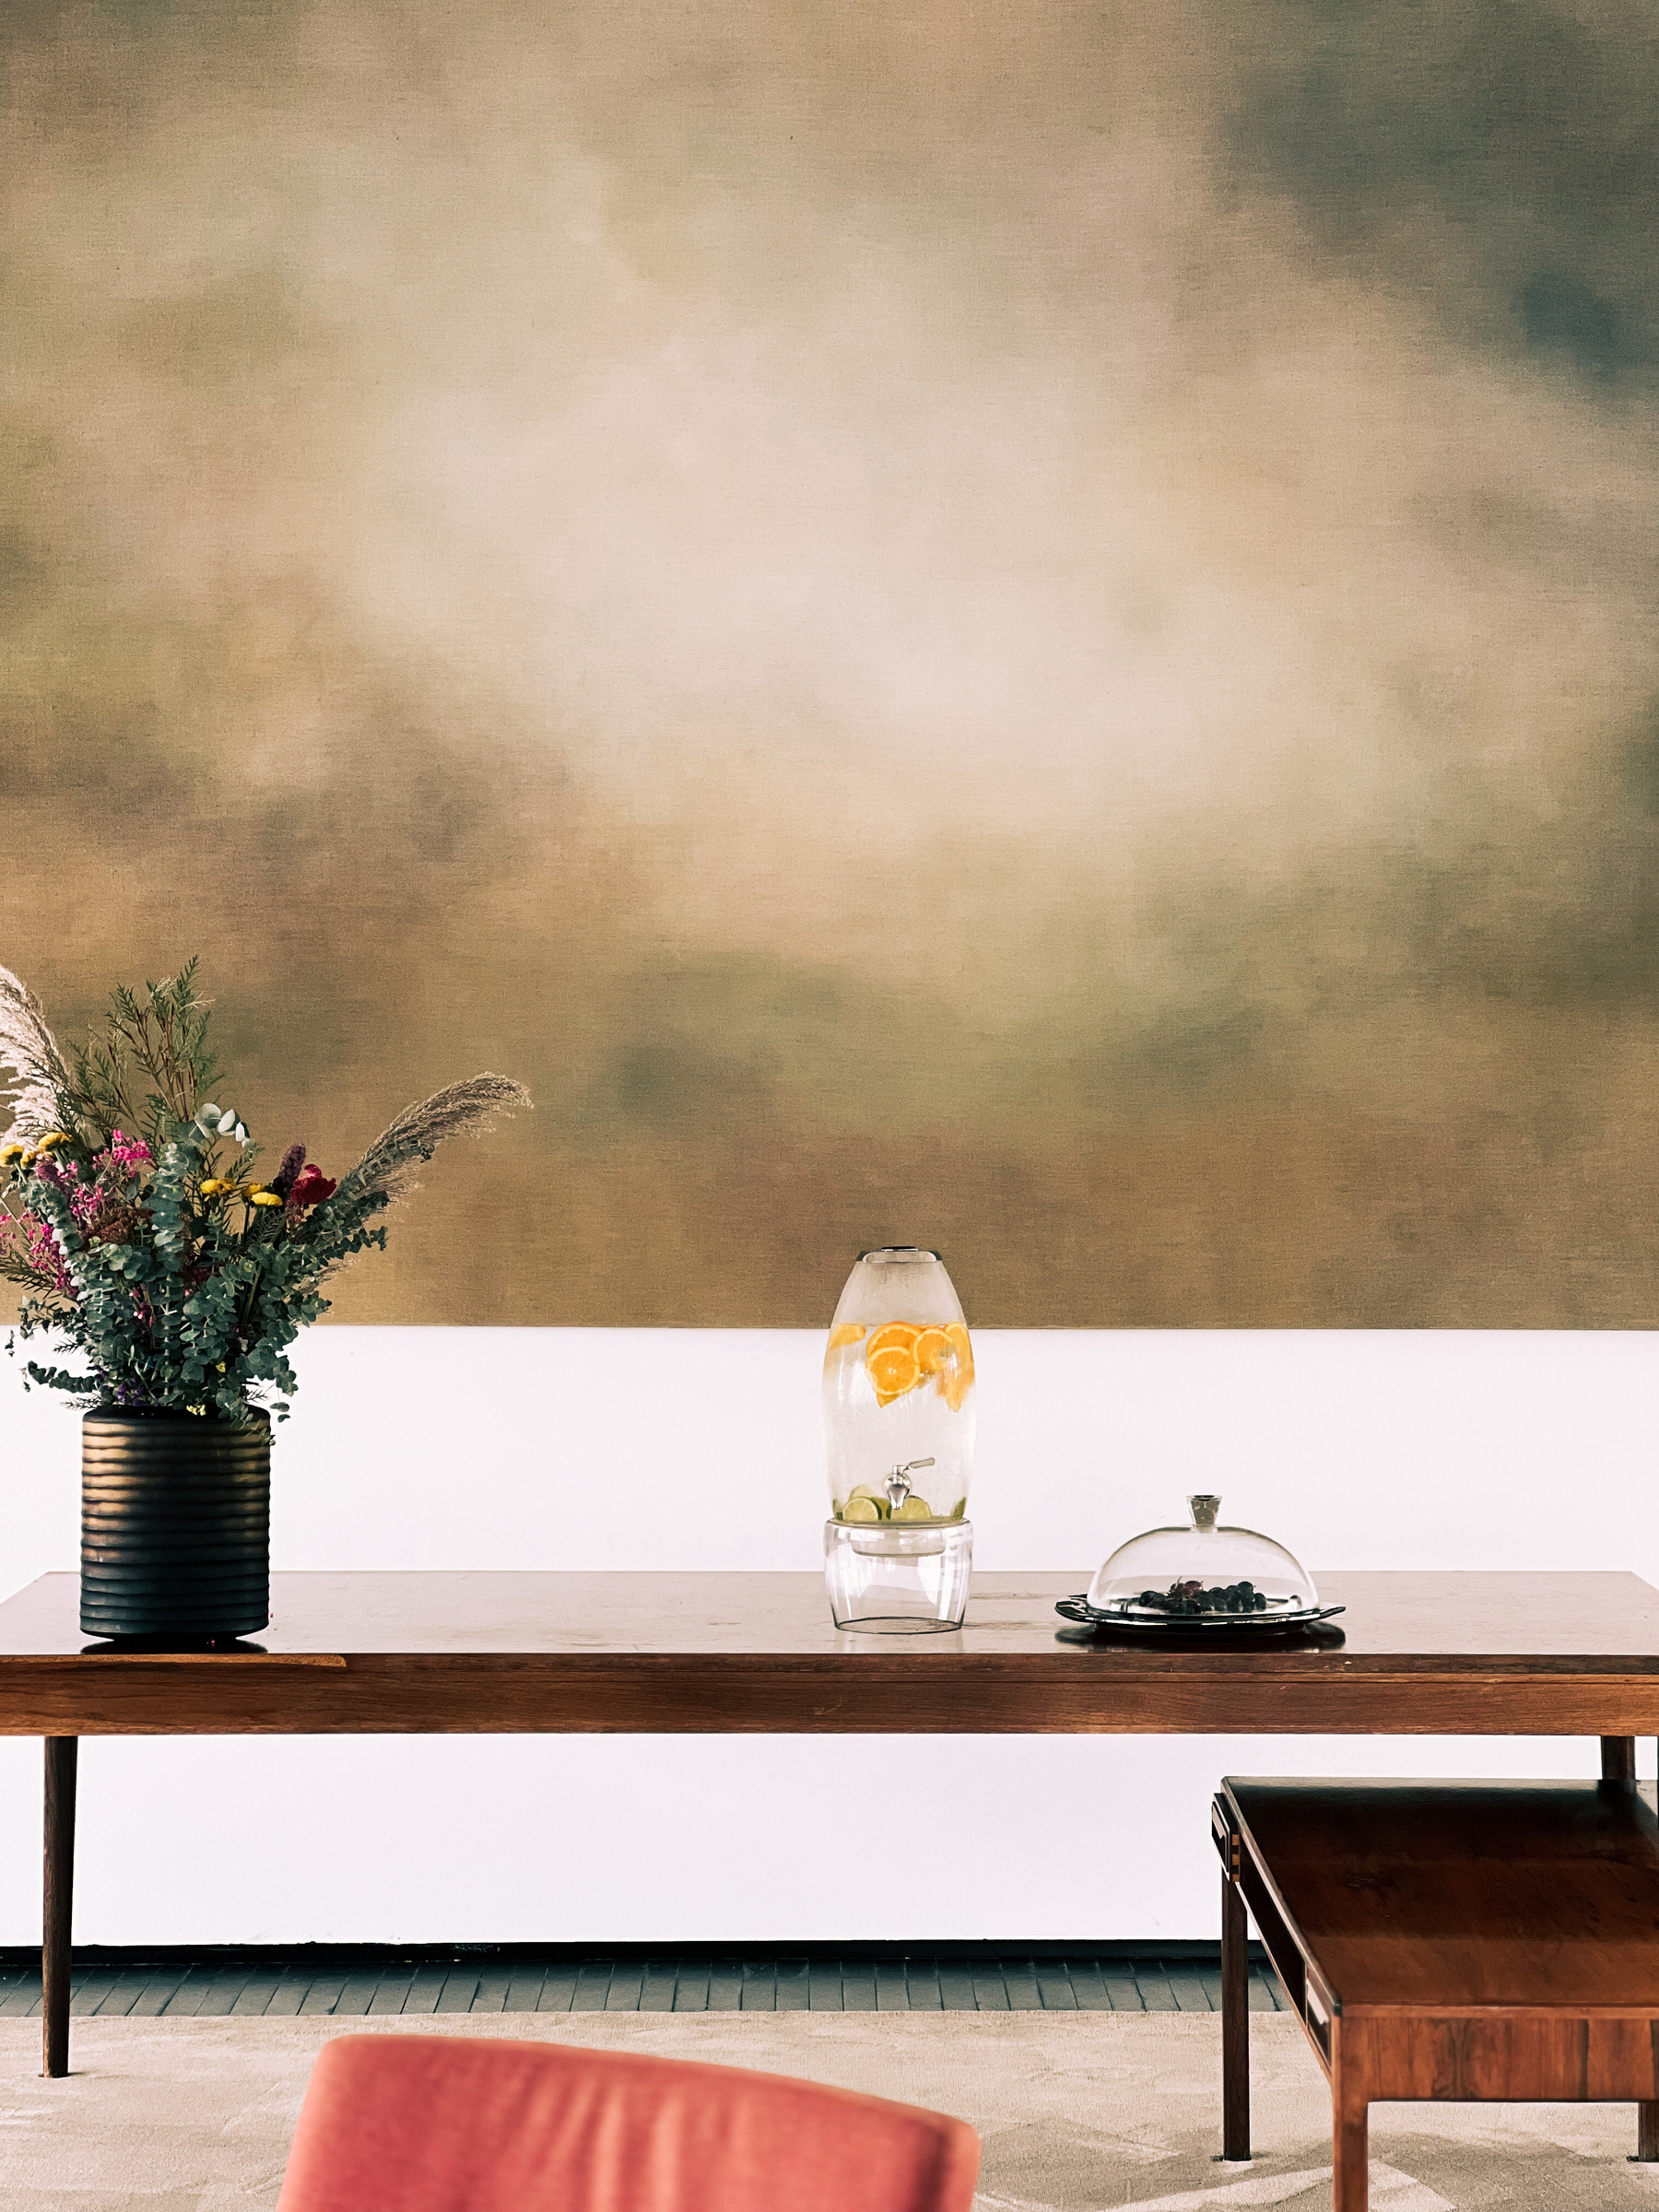 A table, a big painting, flowers, water. It’s an hotel. 